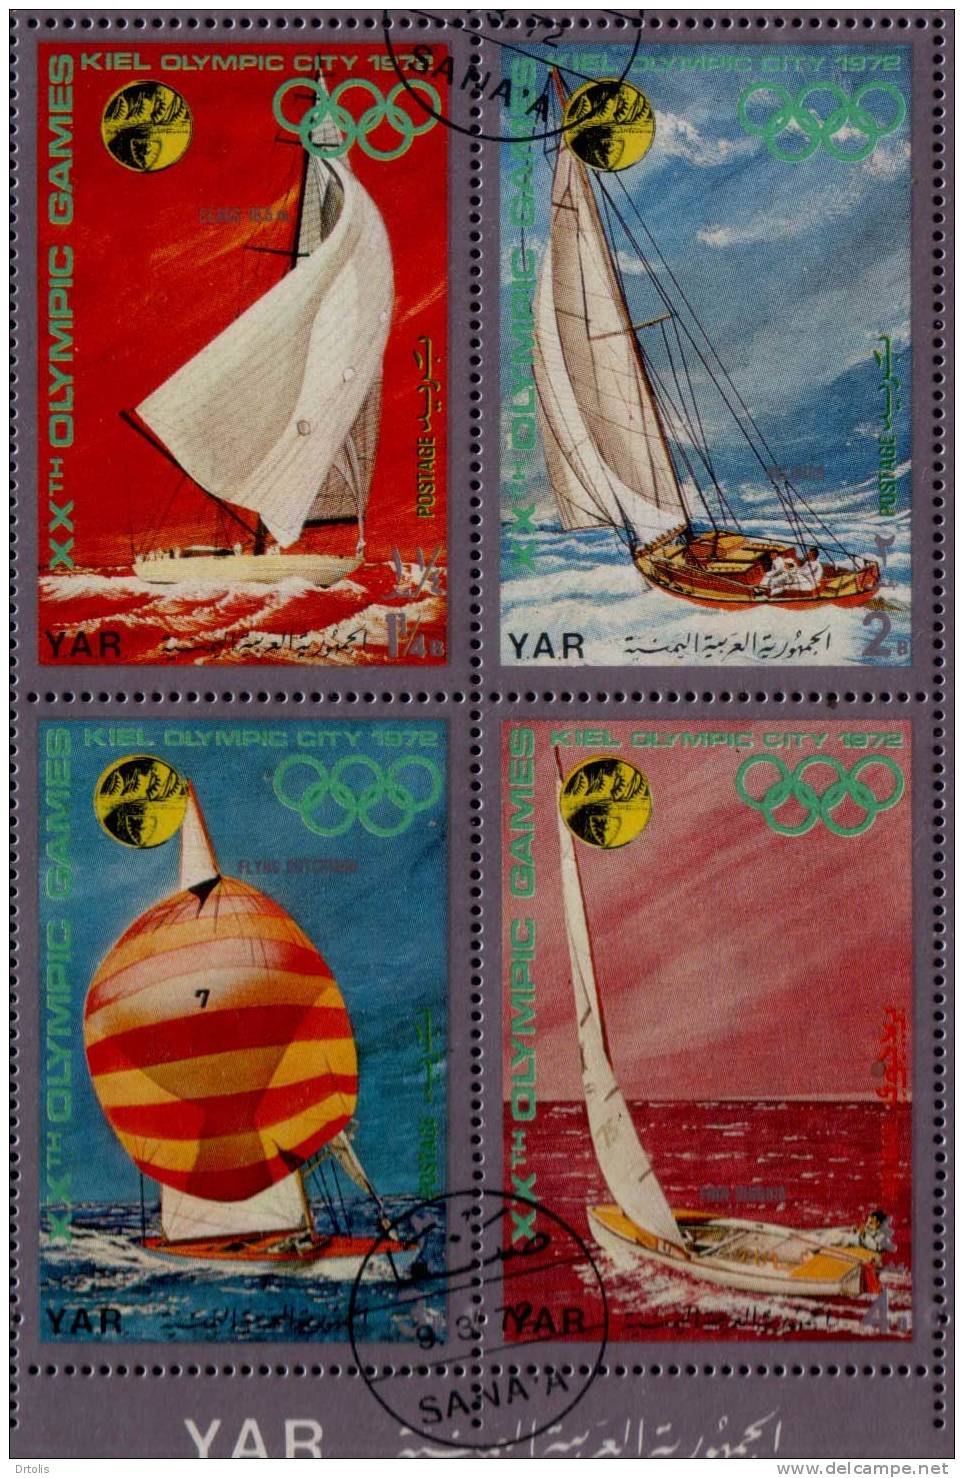 YEMEN / WINTER OLYMPIC GAMES / KIEL OLYMPIC CITY 1972 / 6 VFU STAMPS / 3 SCANS . - Hiver 1972: Sapporo